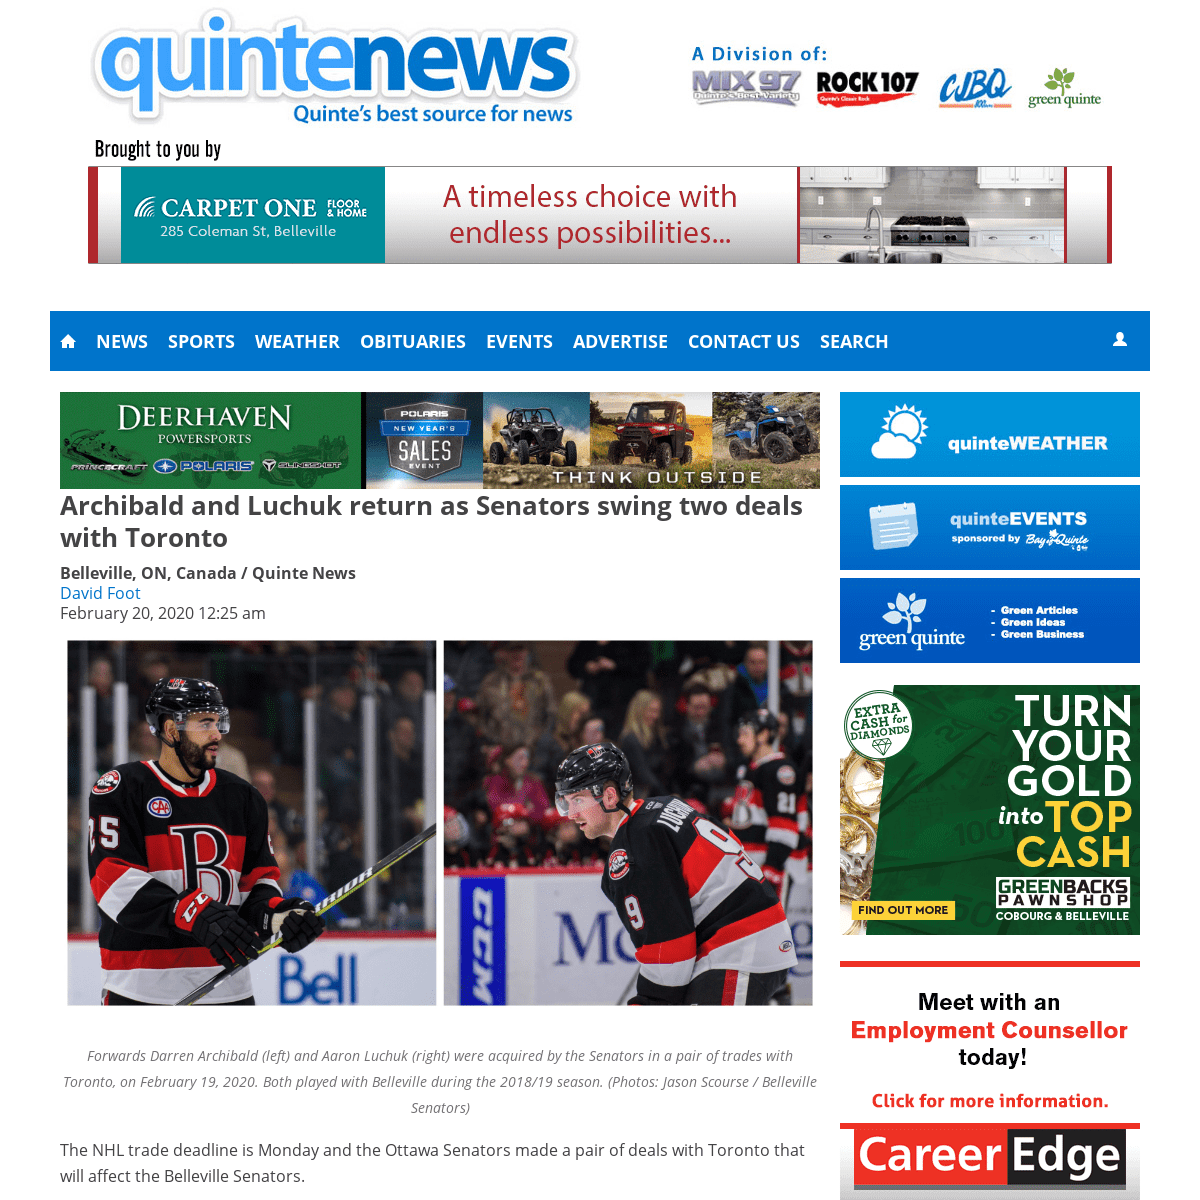 A complete backup of www.quintenews.com/2020/02/20/archibald-and-luchuk-return-as-senators-swing-two-deals-with-toronto/